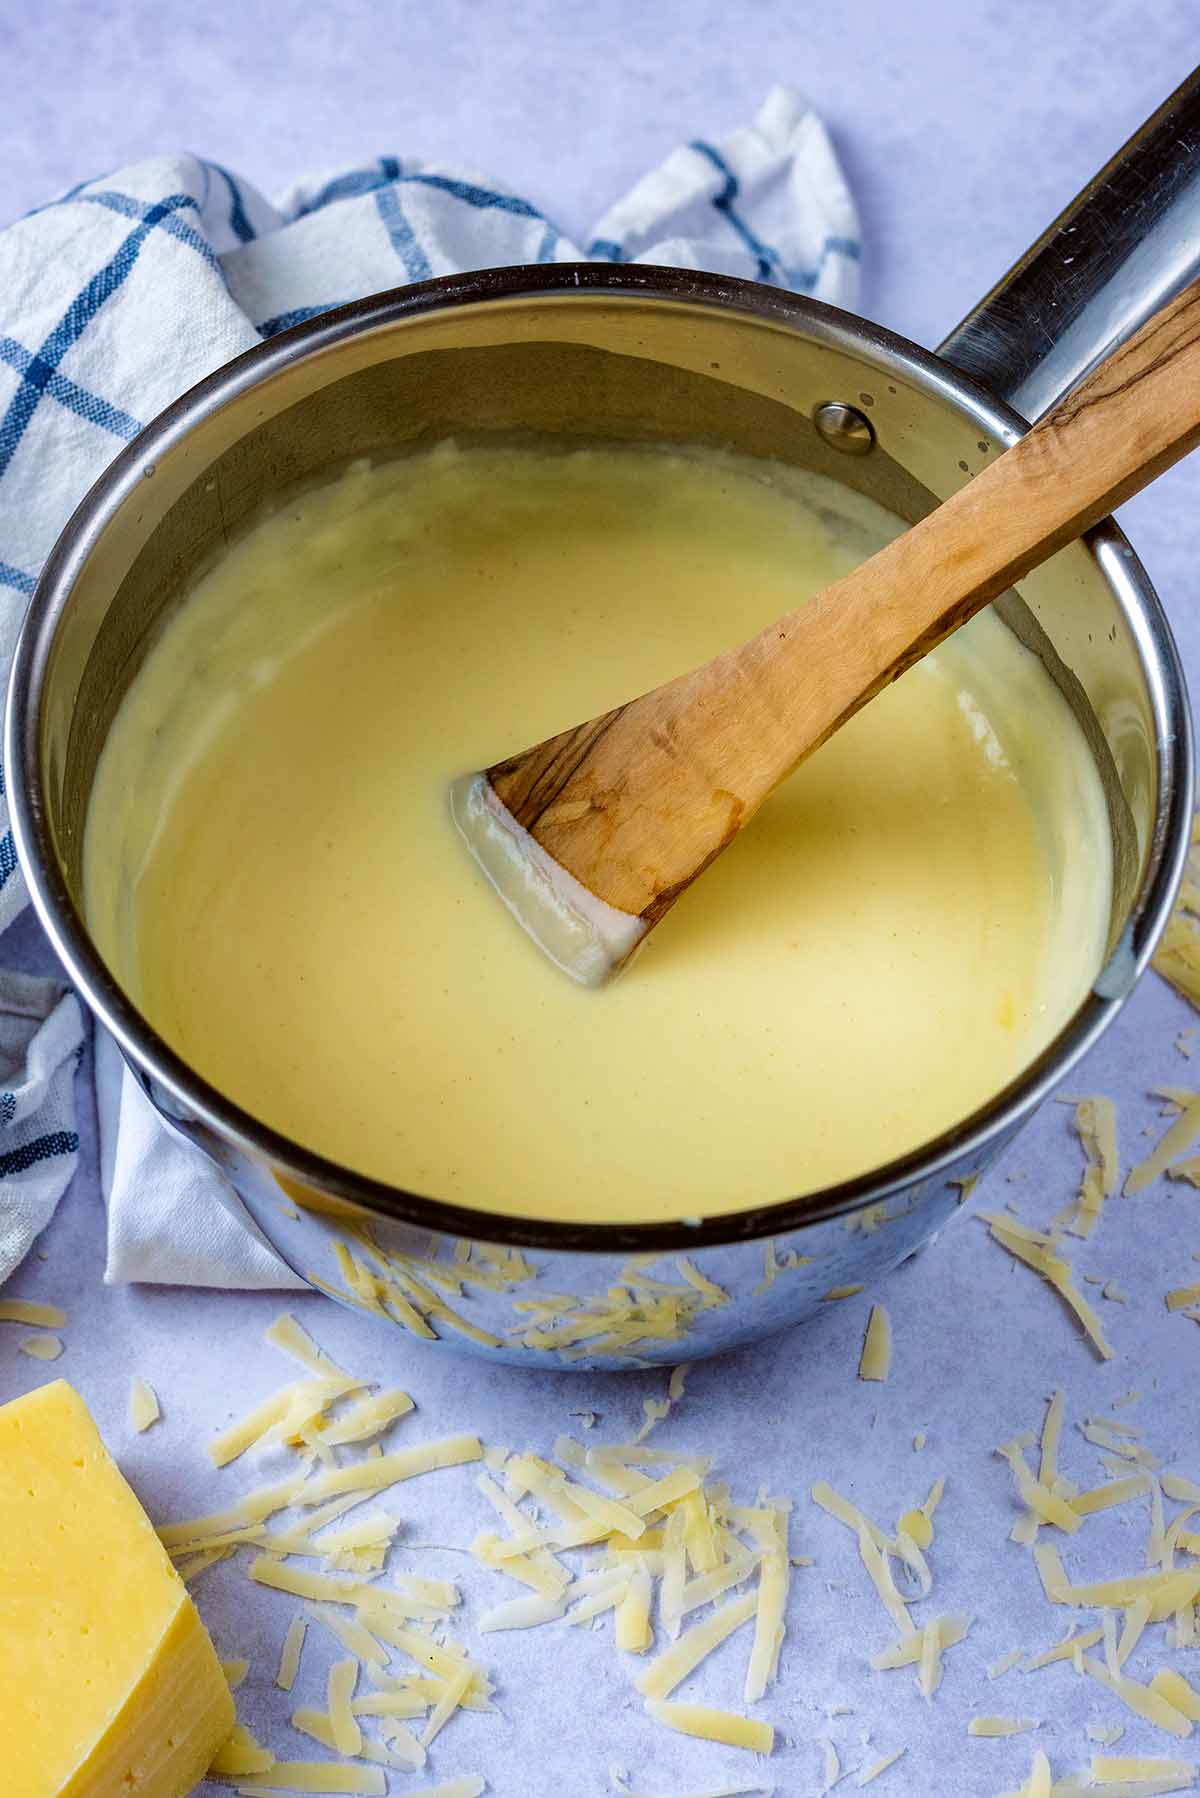 A wooden spatula in a pan of cheese sauce.